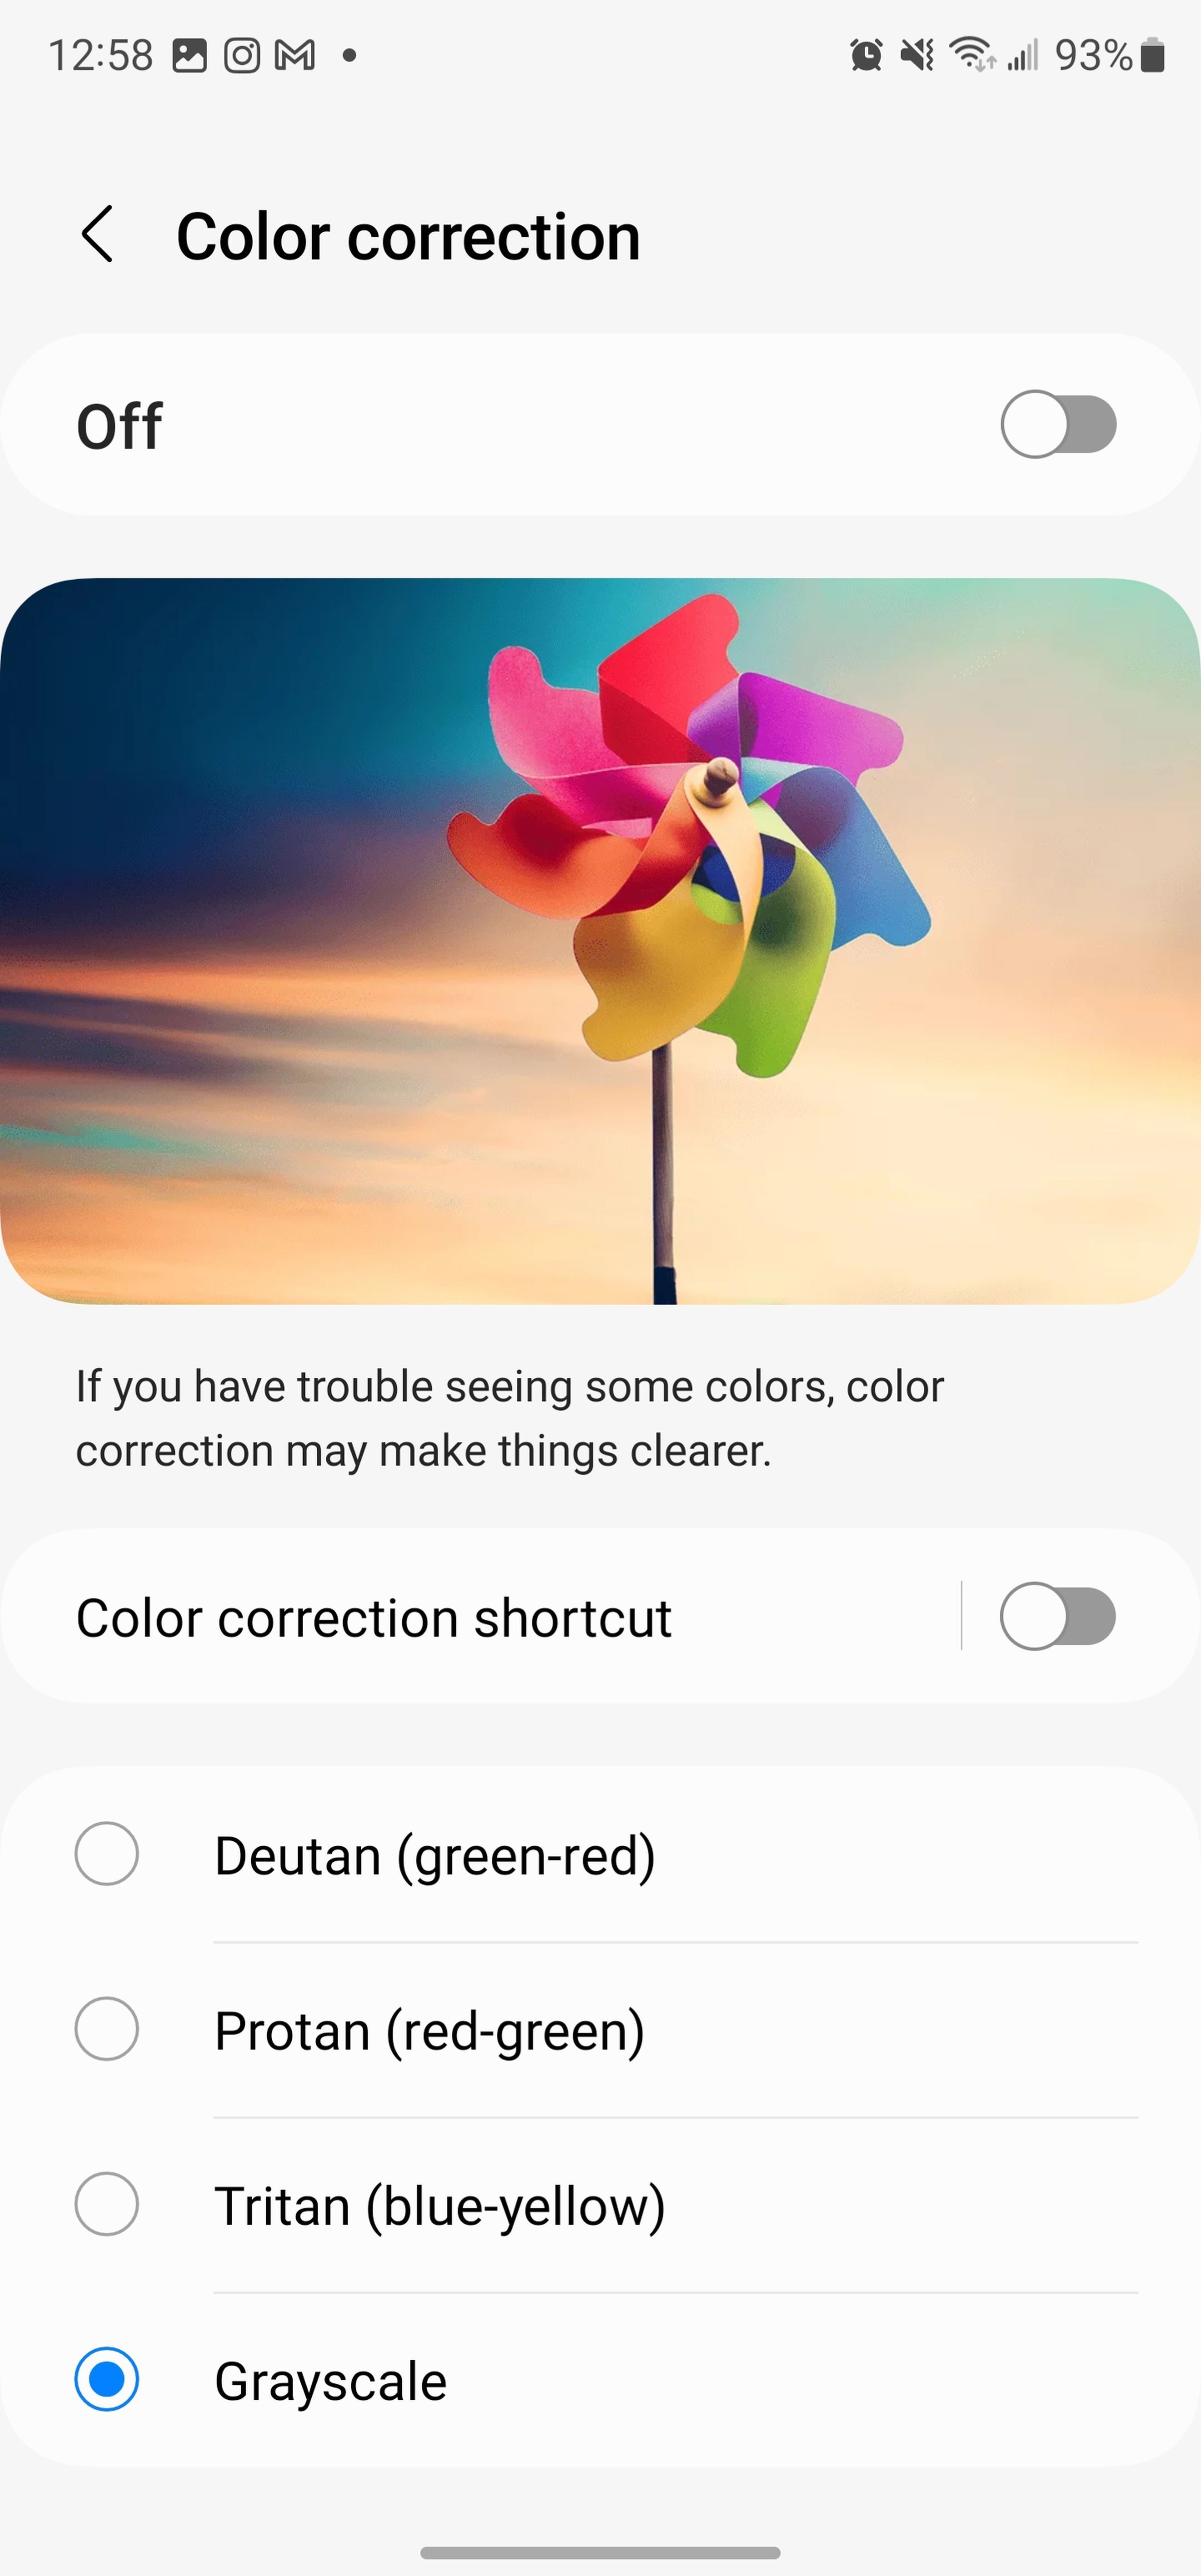 Color correction page with a picture of a colorful pinwheel and a colorful background.